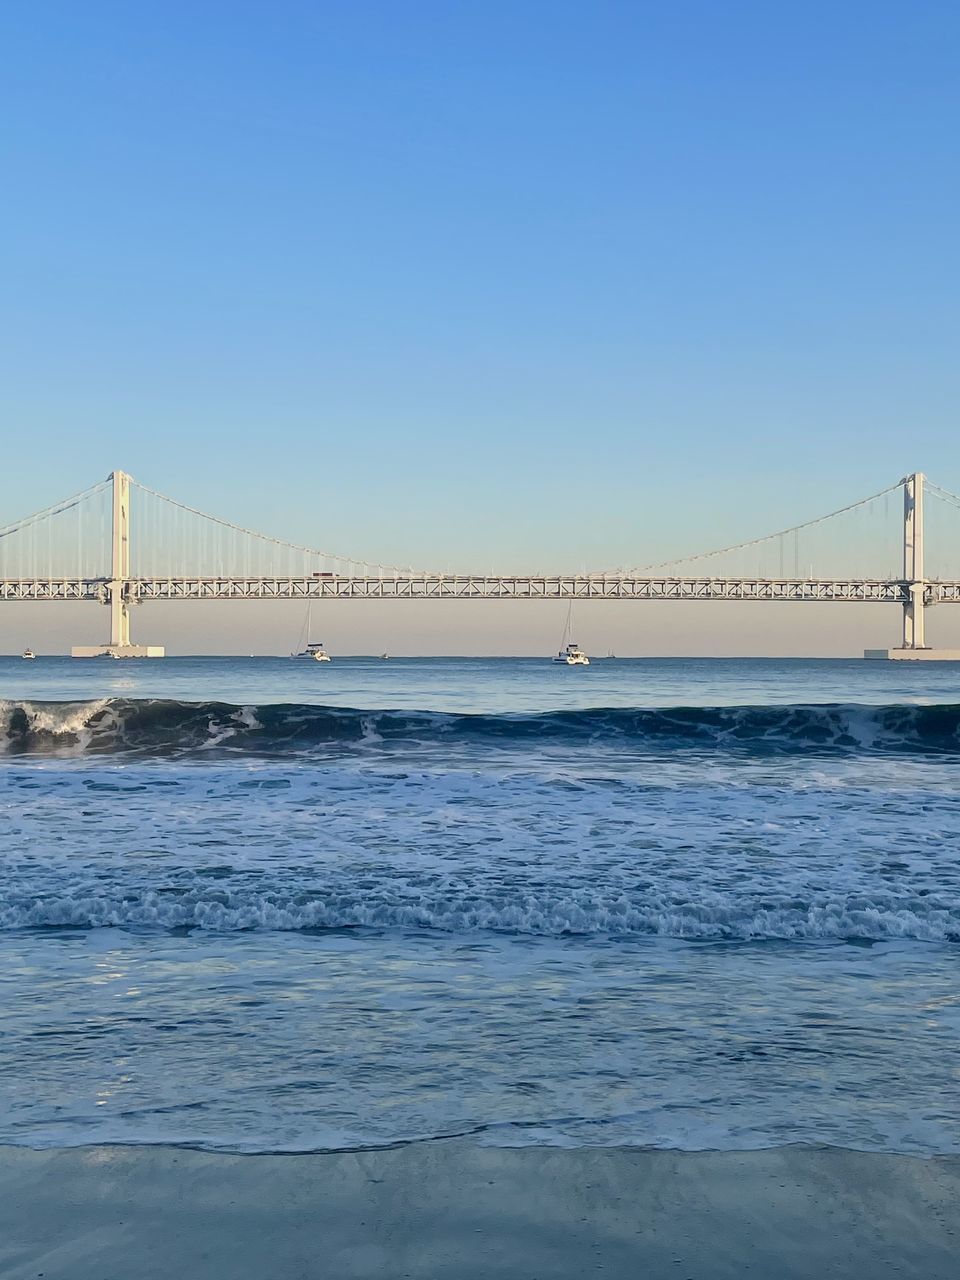 bridge, water, suspension bridge, sky, built structure, architecture, transportation, sea, travel destinations, nature, travel, clear sky, copy space, engineering, ocean, blue, tourism, horizon, cable-stayed bridge, city, scenics - nature, wave, shore, coast, beauty in nature, day, outdoors, pier, land, bay, building exterior, sunny, bay of water, tranquil scene, sunlight, beach, tranquility, motion